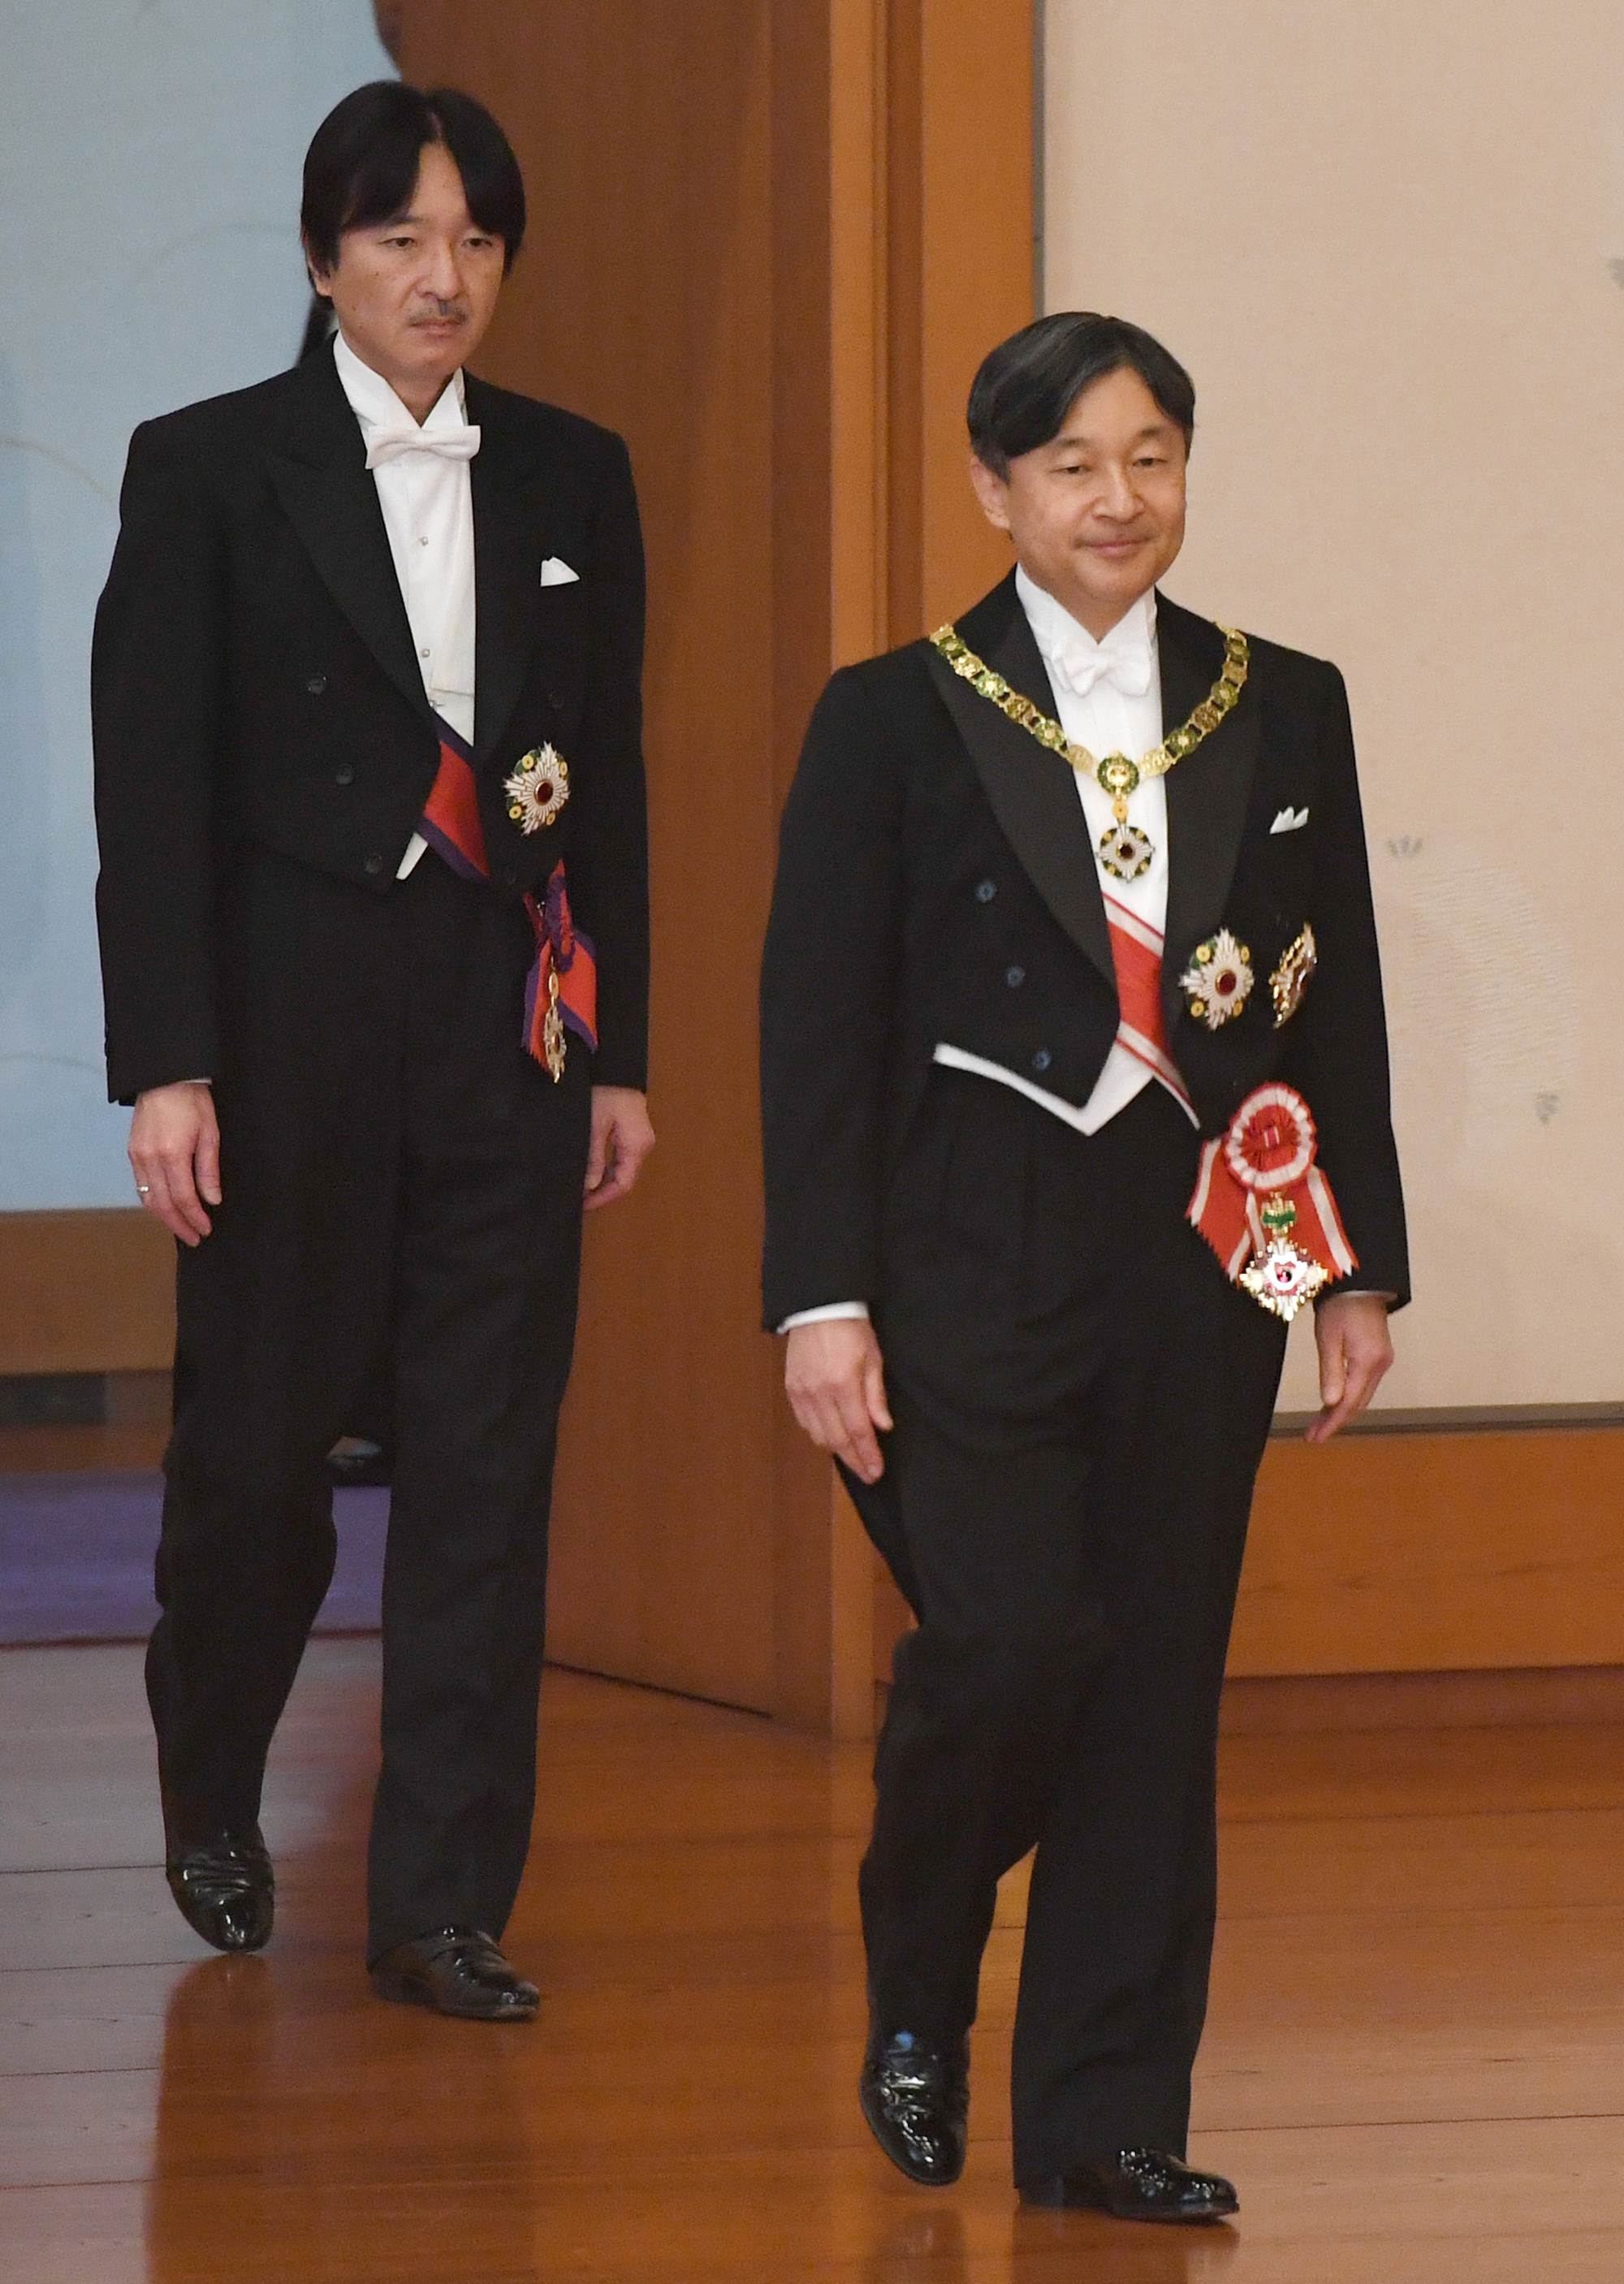 On 1st day as Japan's emperor, Naruhito vows to pursue peace